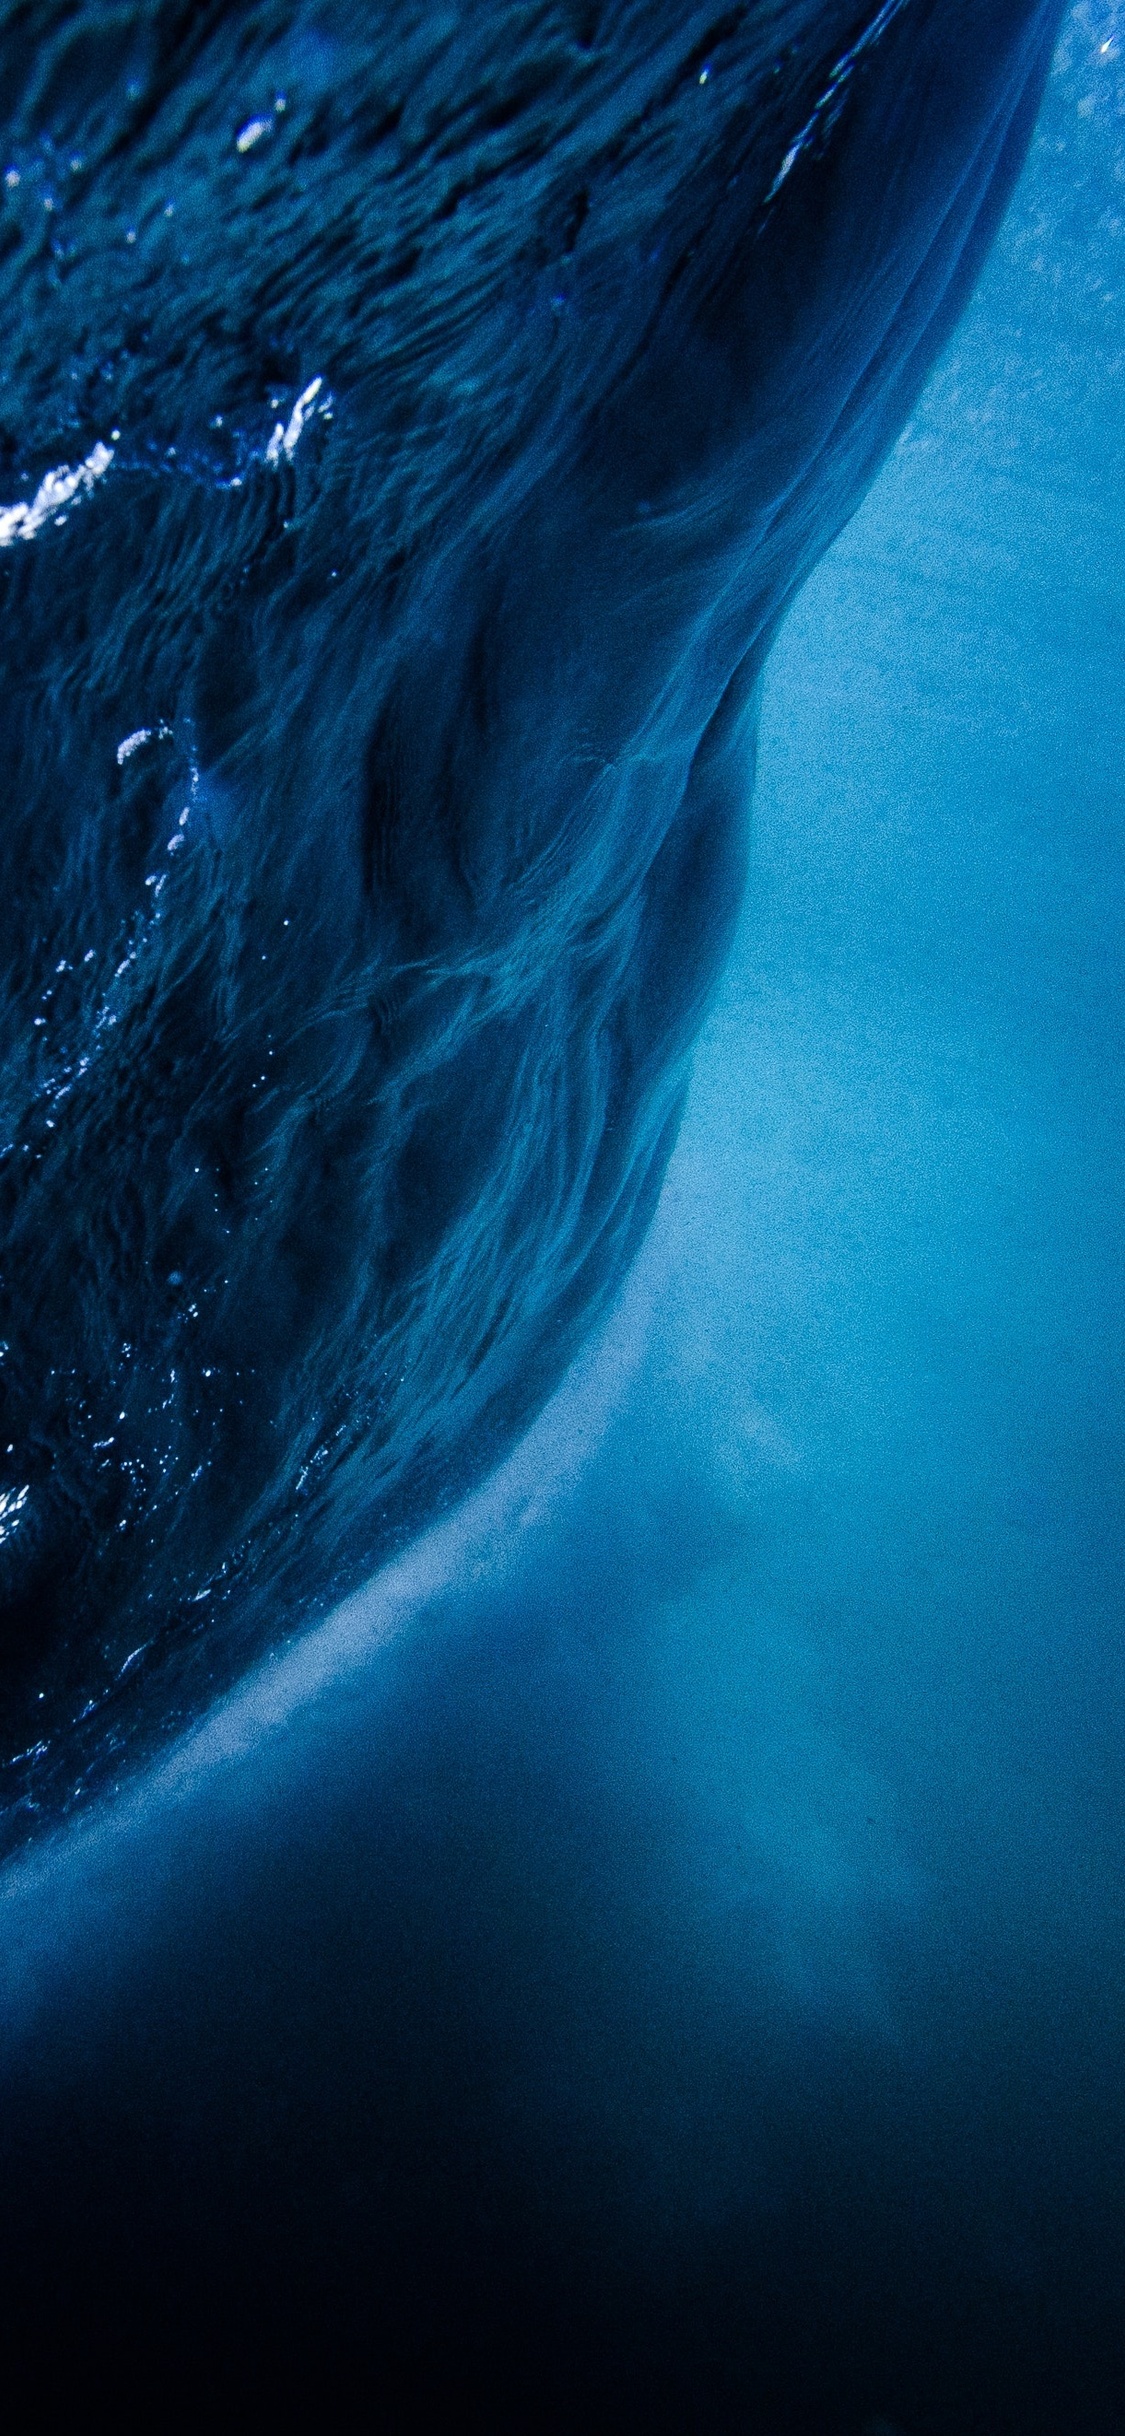 Blue Ocean Sea Underwater 4k iPhone XS, iPhone iPhone X HD 4k Wallpaper, Image, Background, Photo and Picture